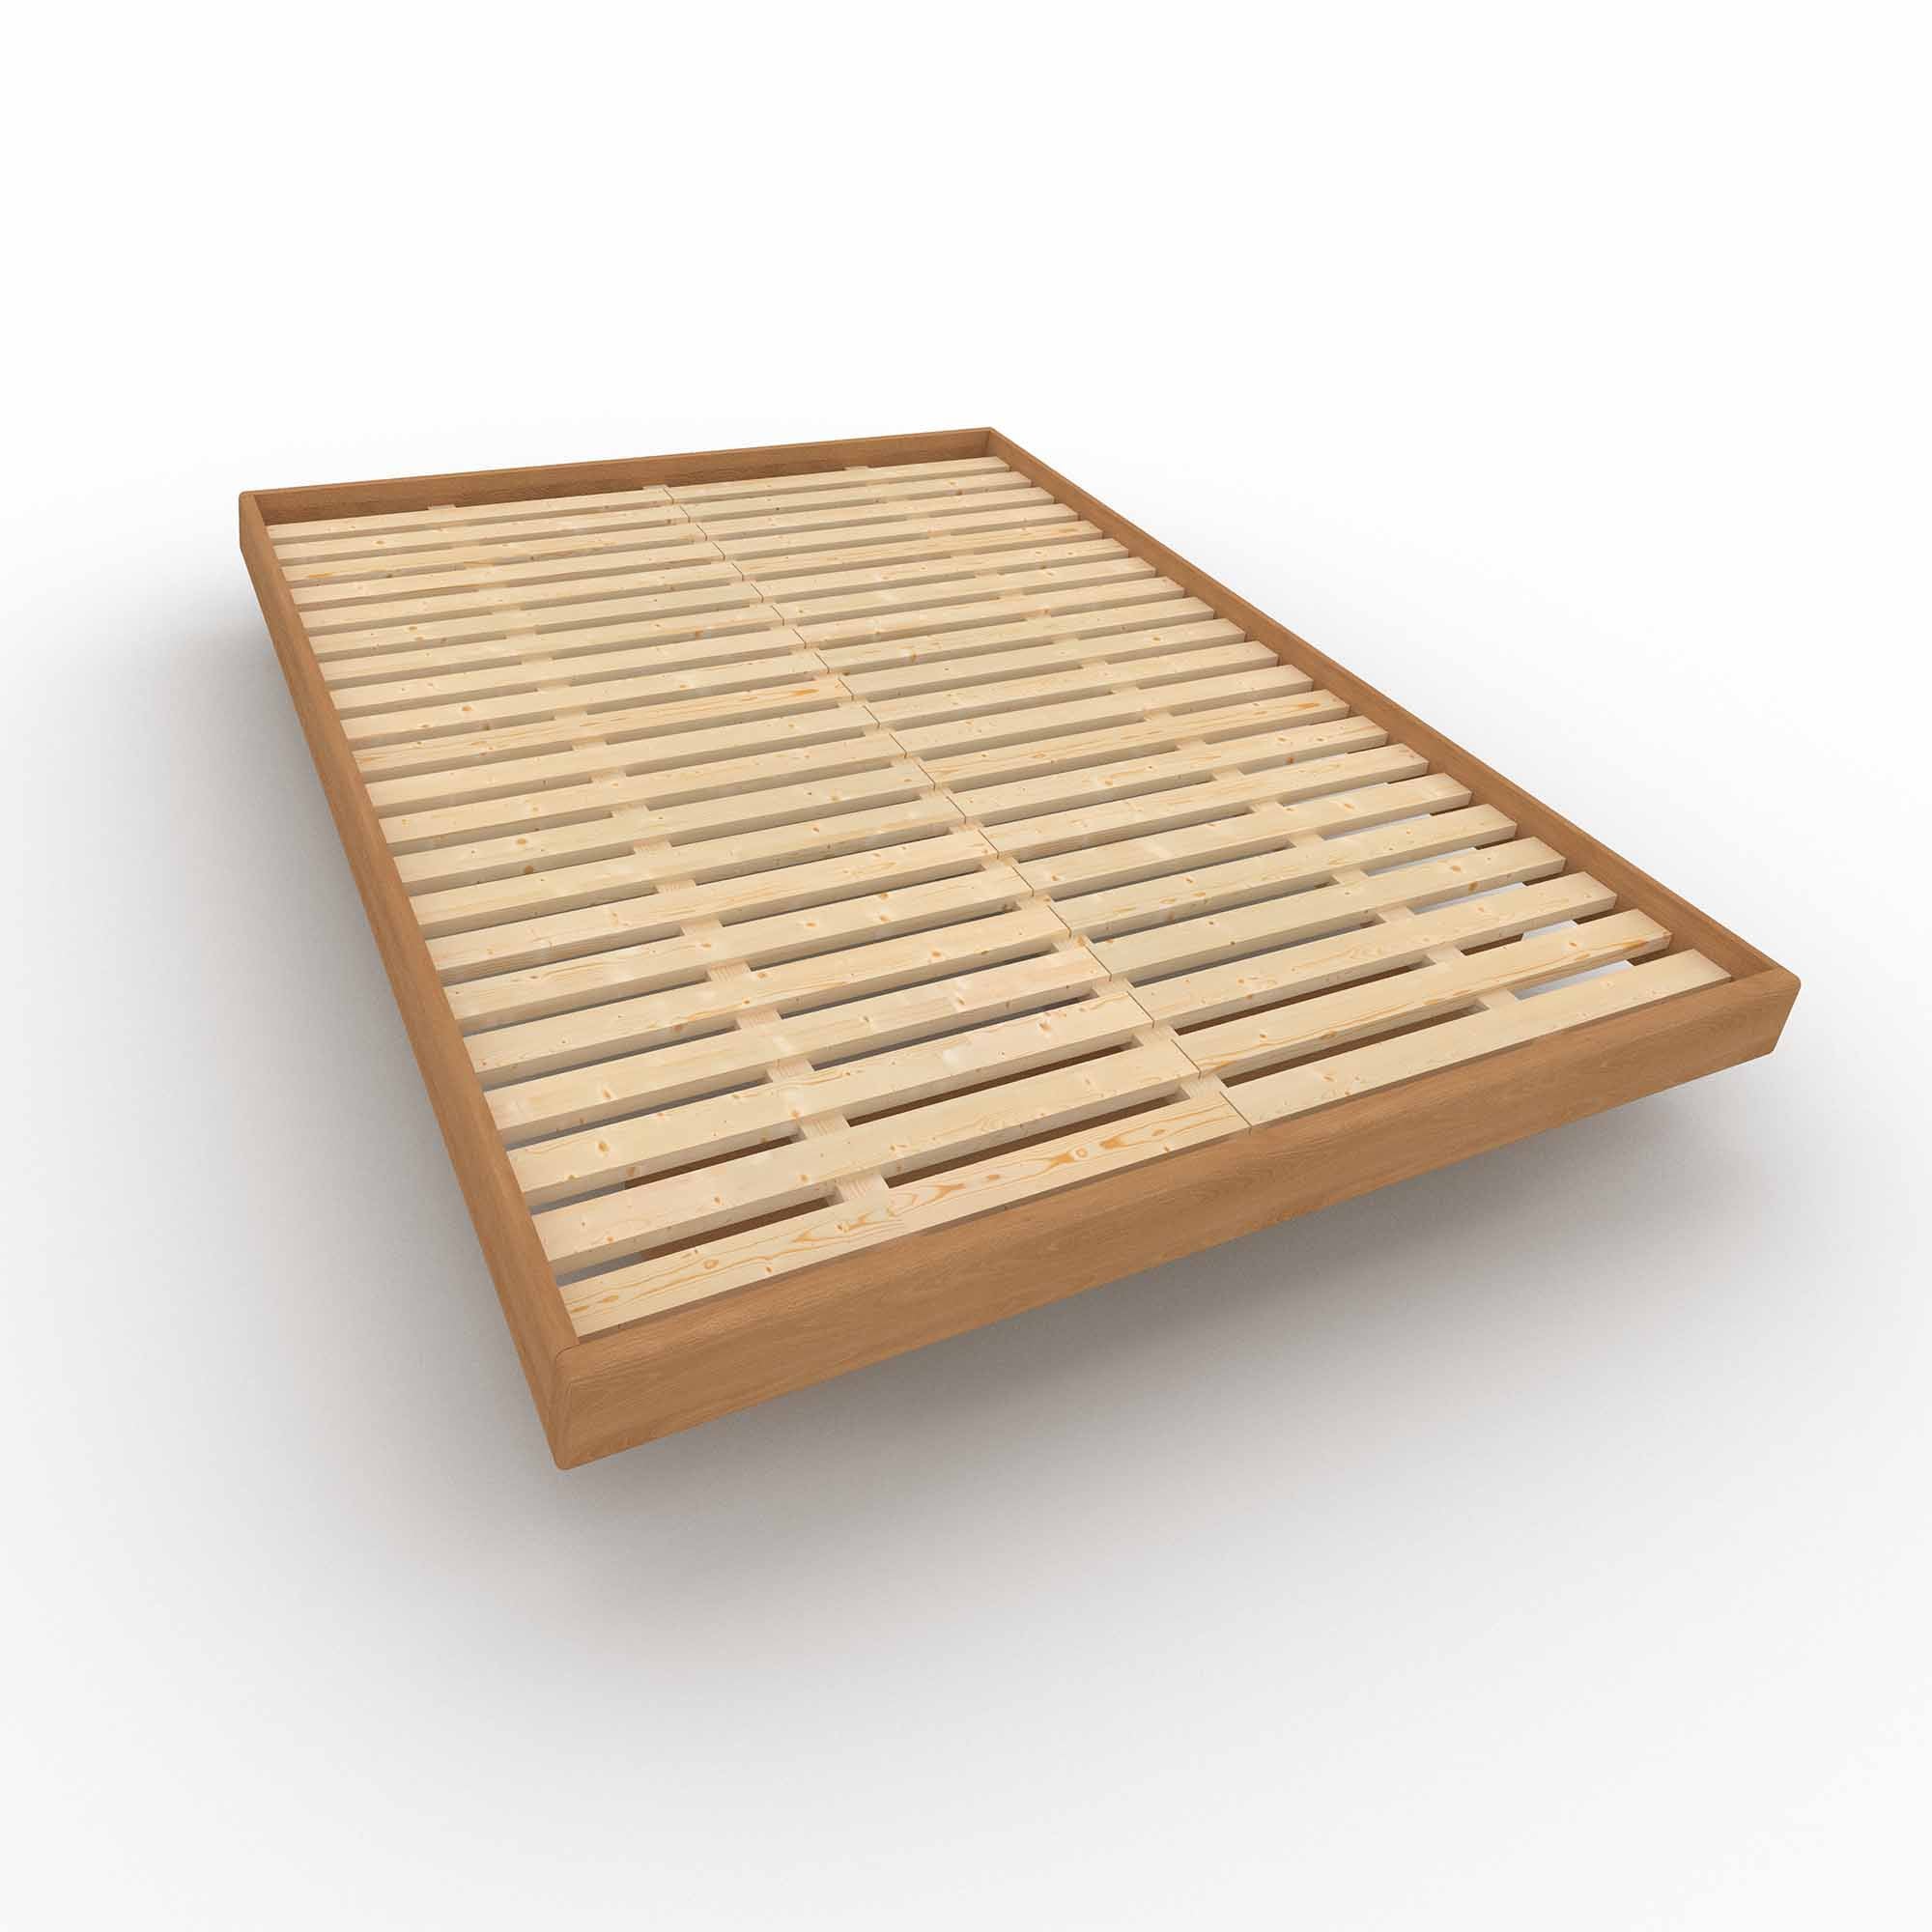 CARRE Double Bed, Beech Wood-caramel bed frame